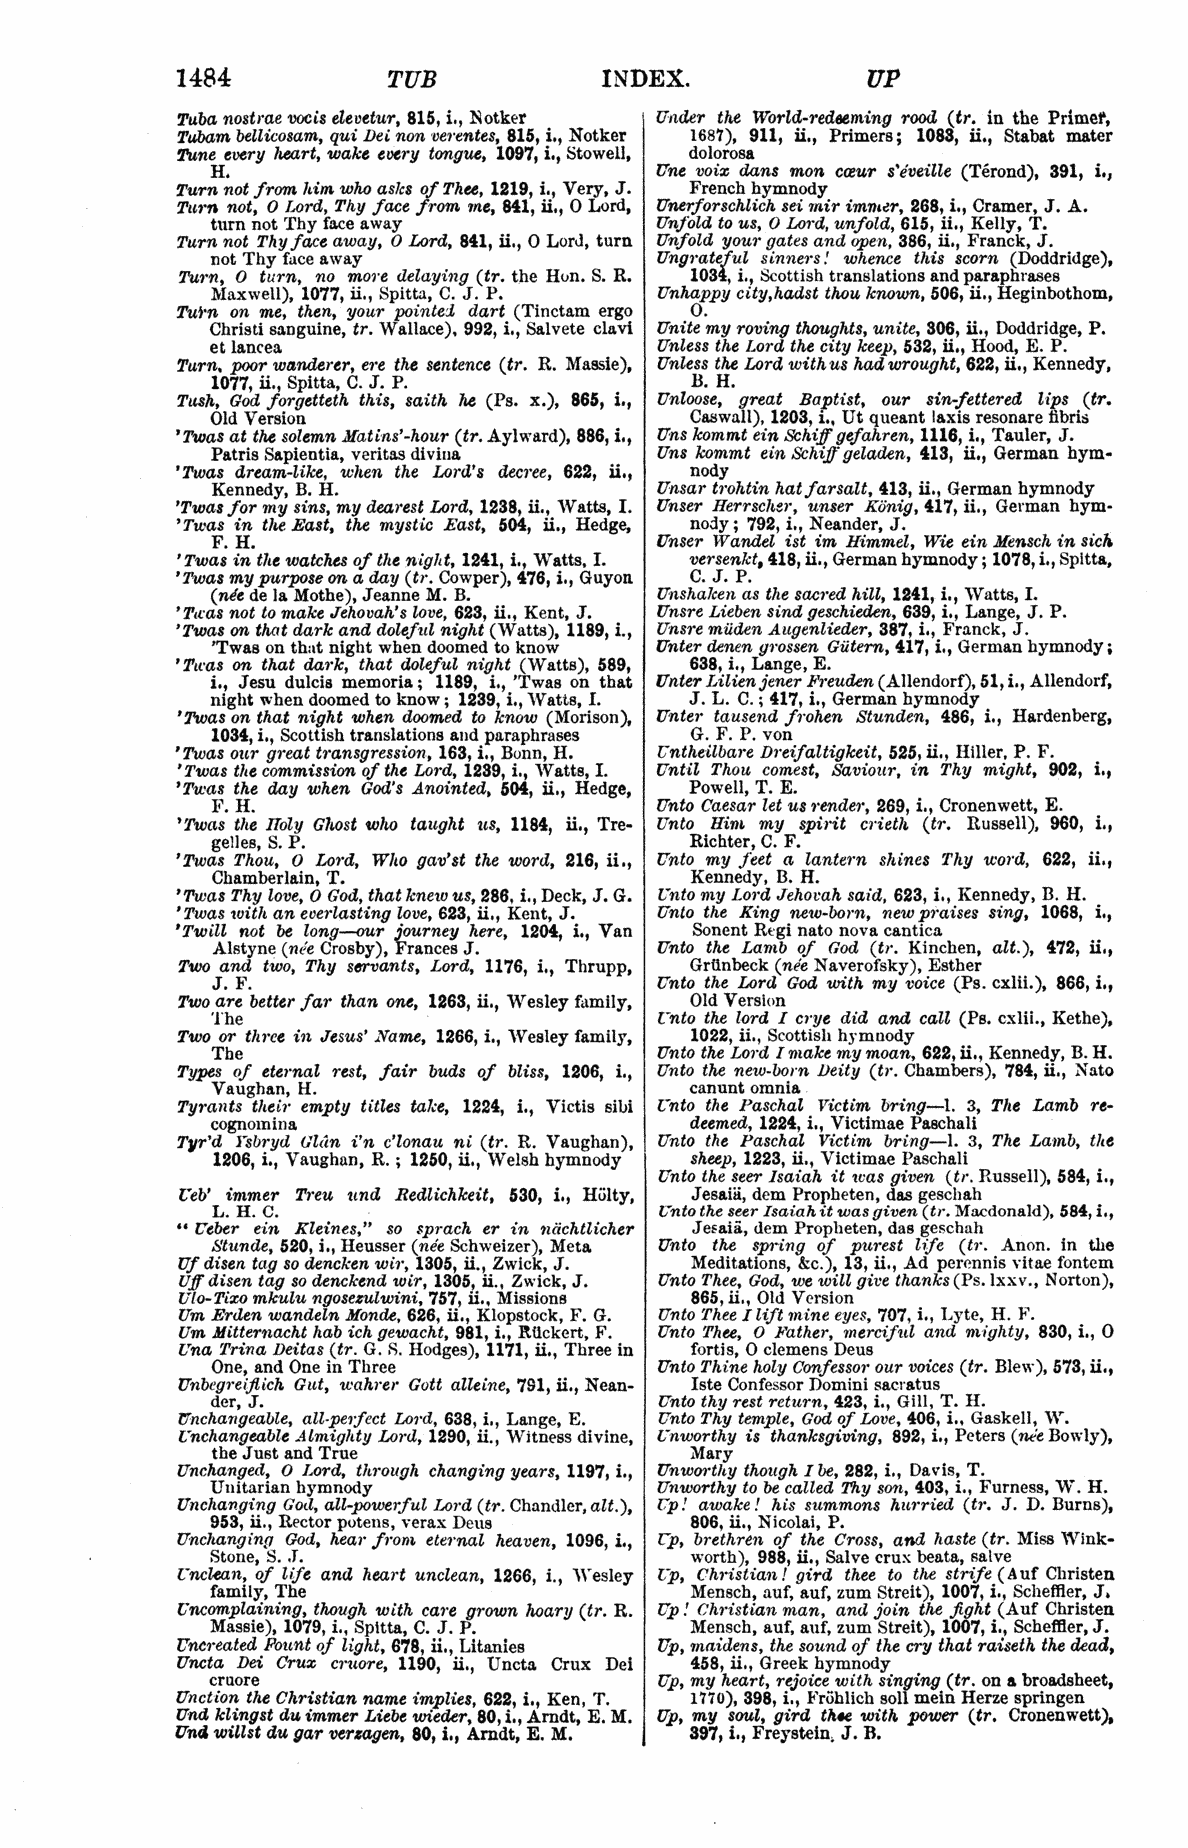 Image of page 1484